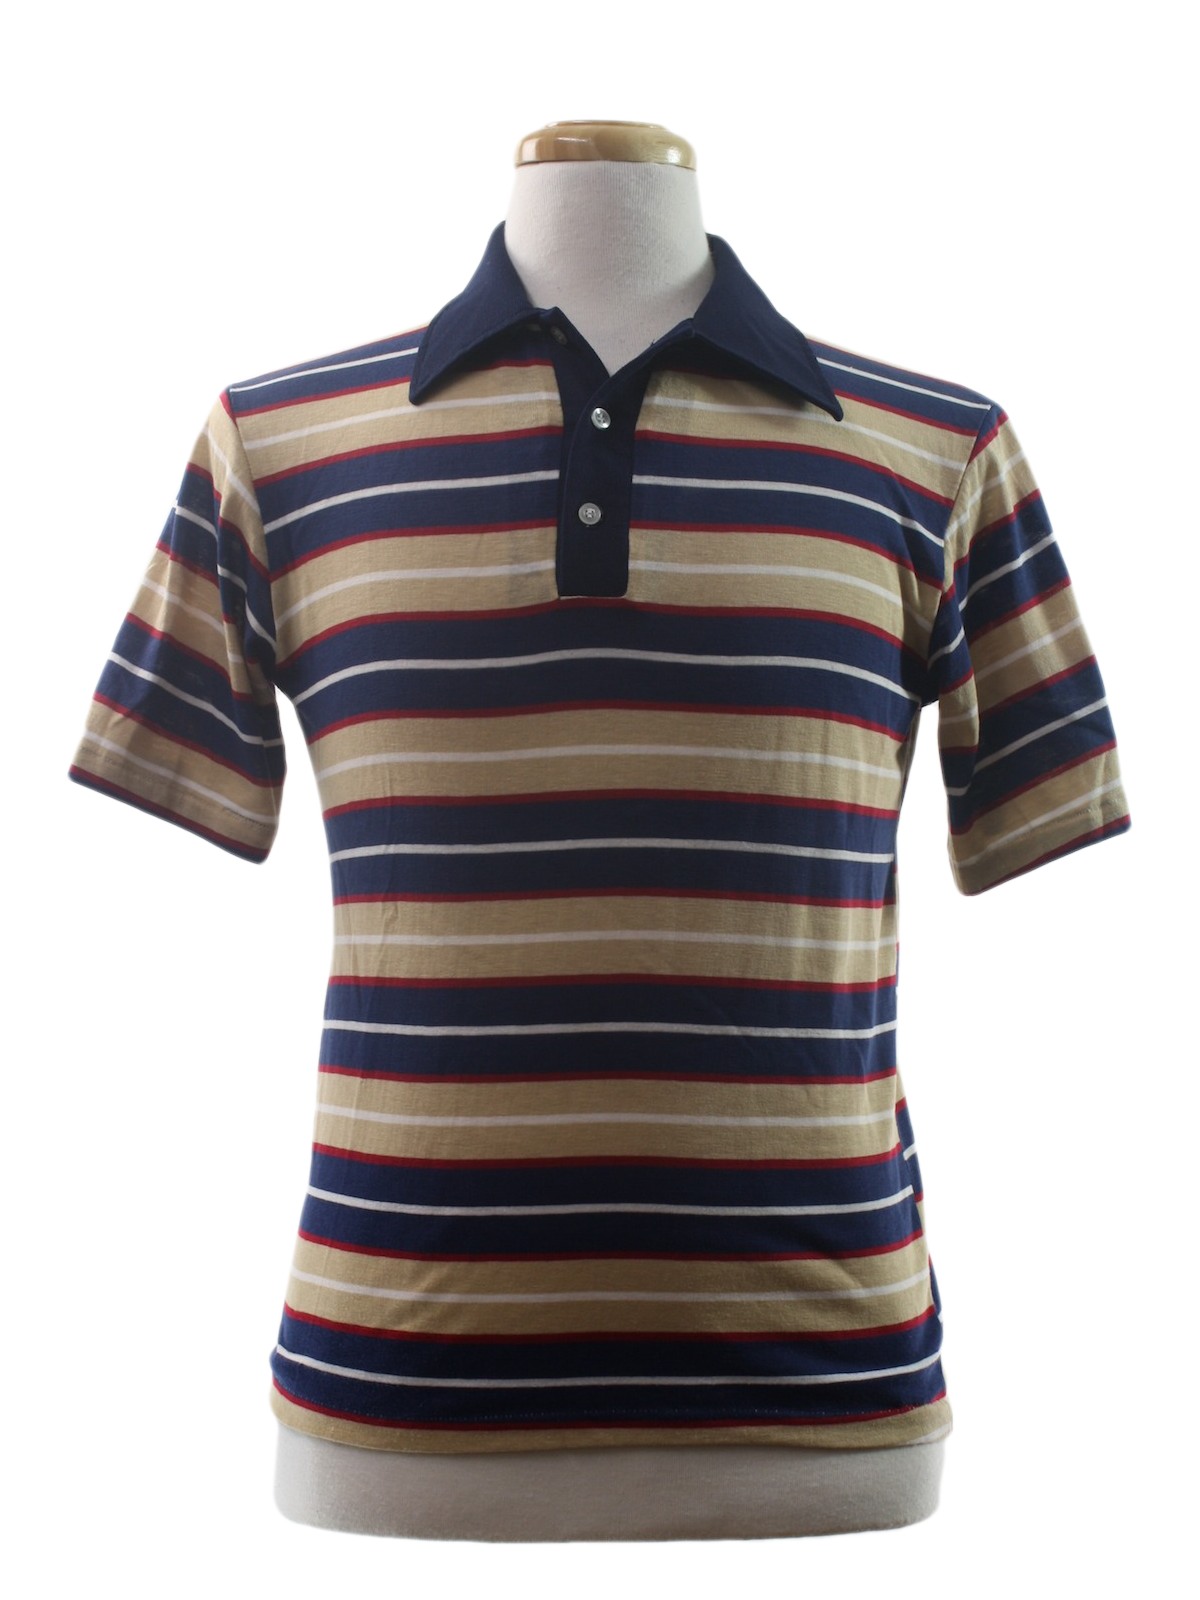 1970's Retro Knit Shirt: 70s -Classic Collection- Mens navy blue ...